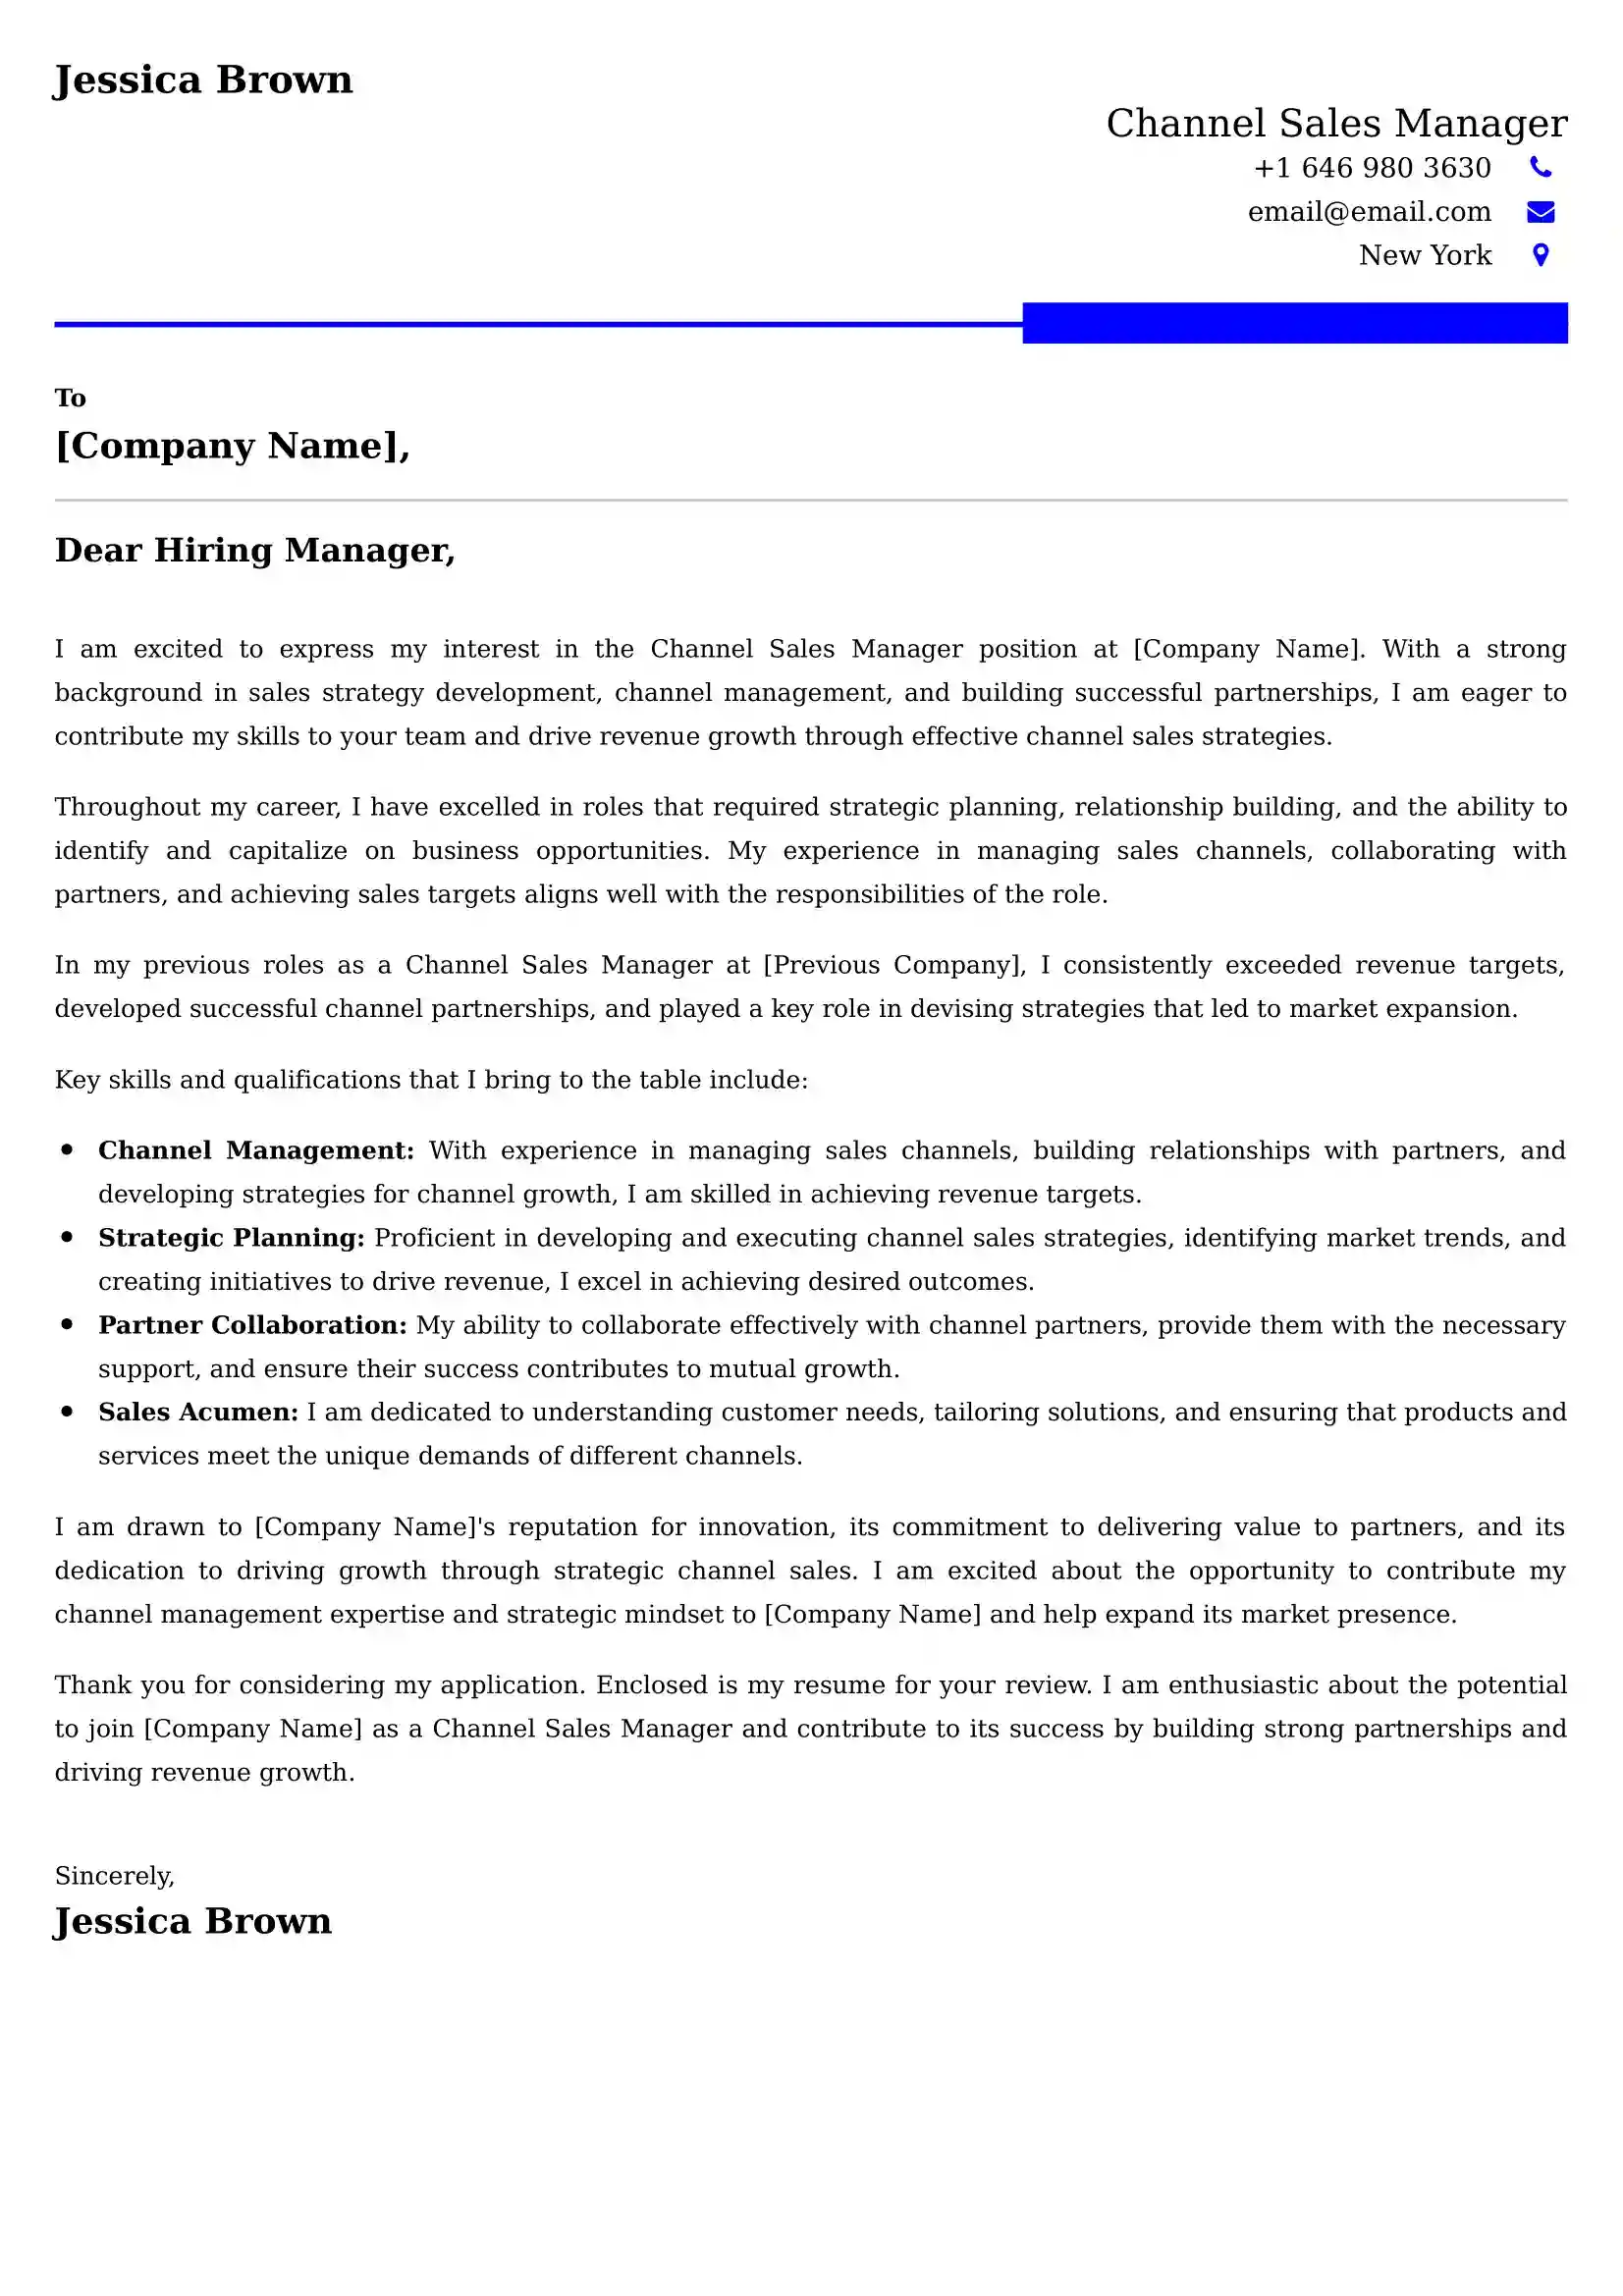 Channel Sales Manager Cover letter Sample